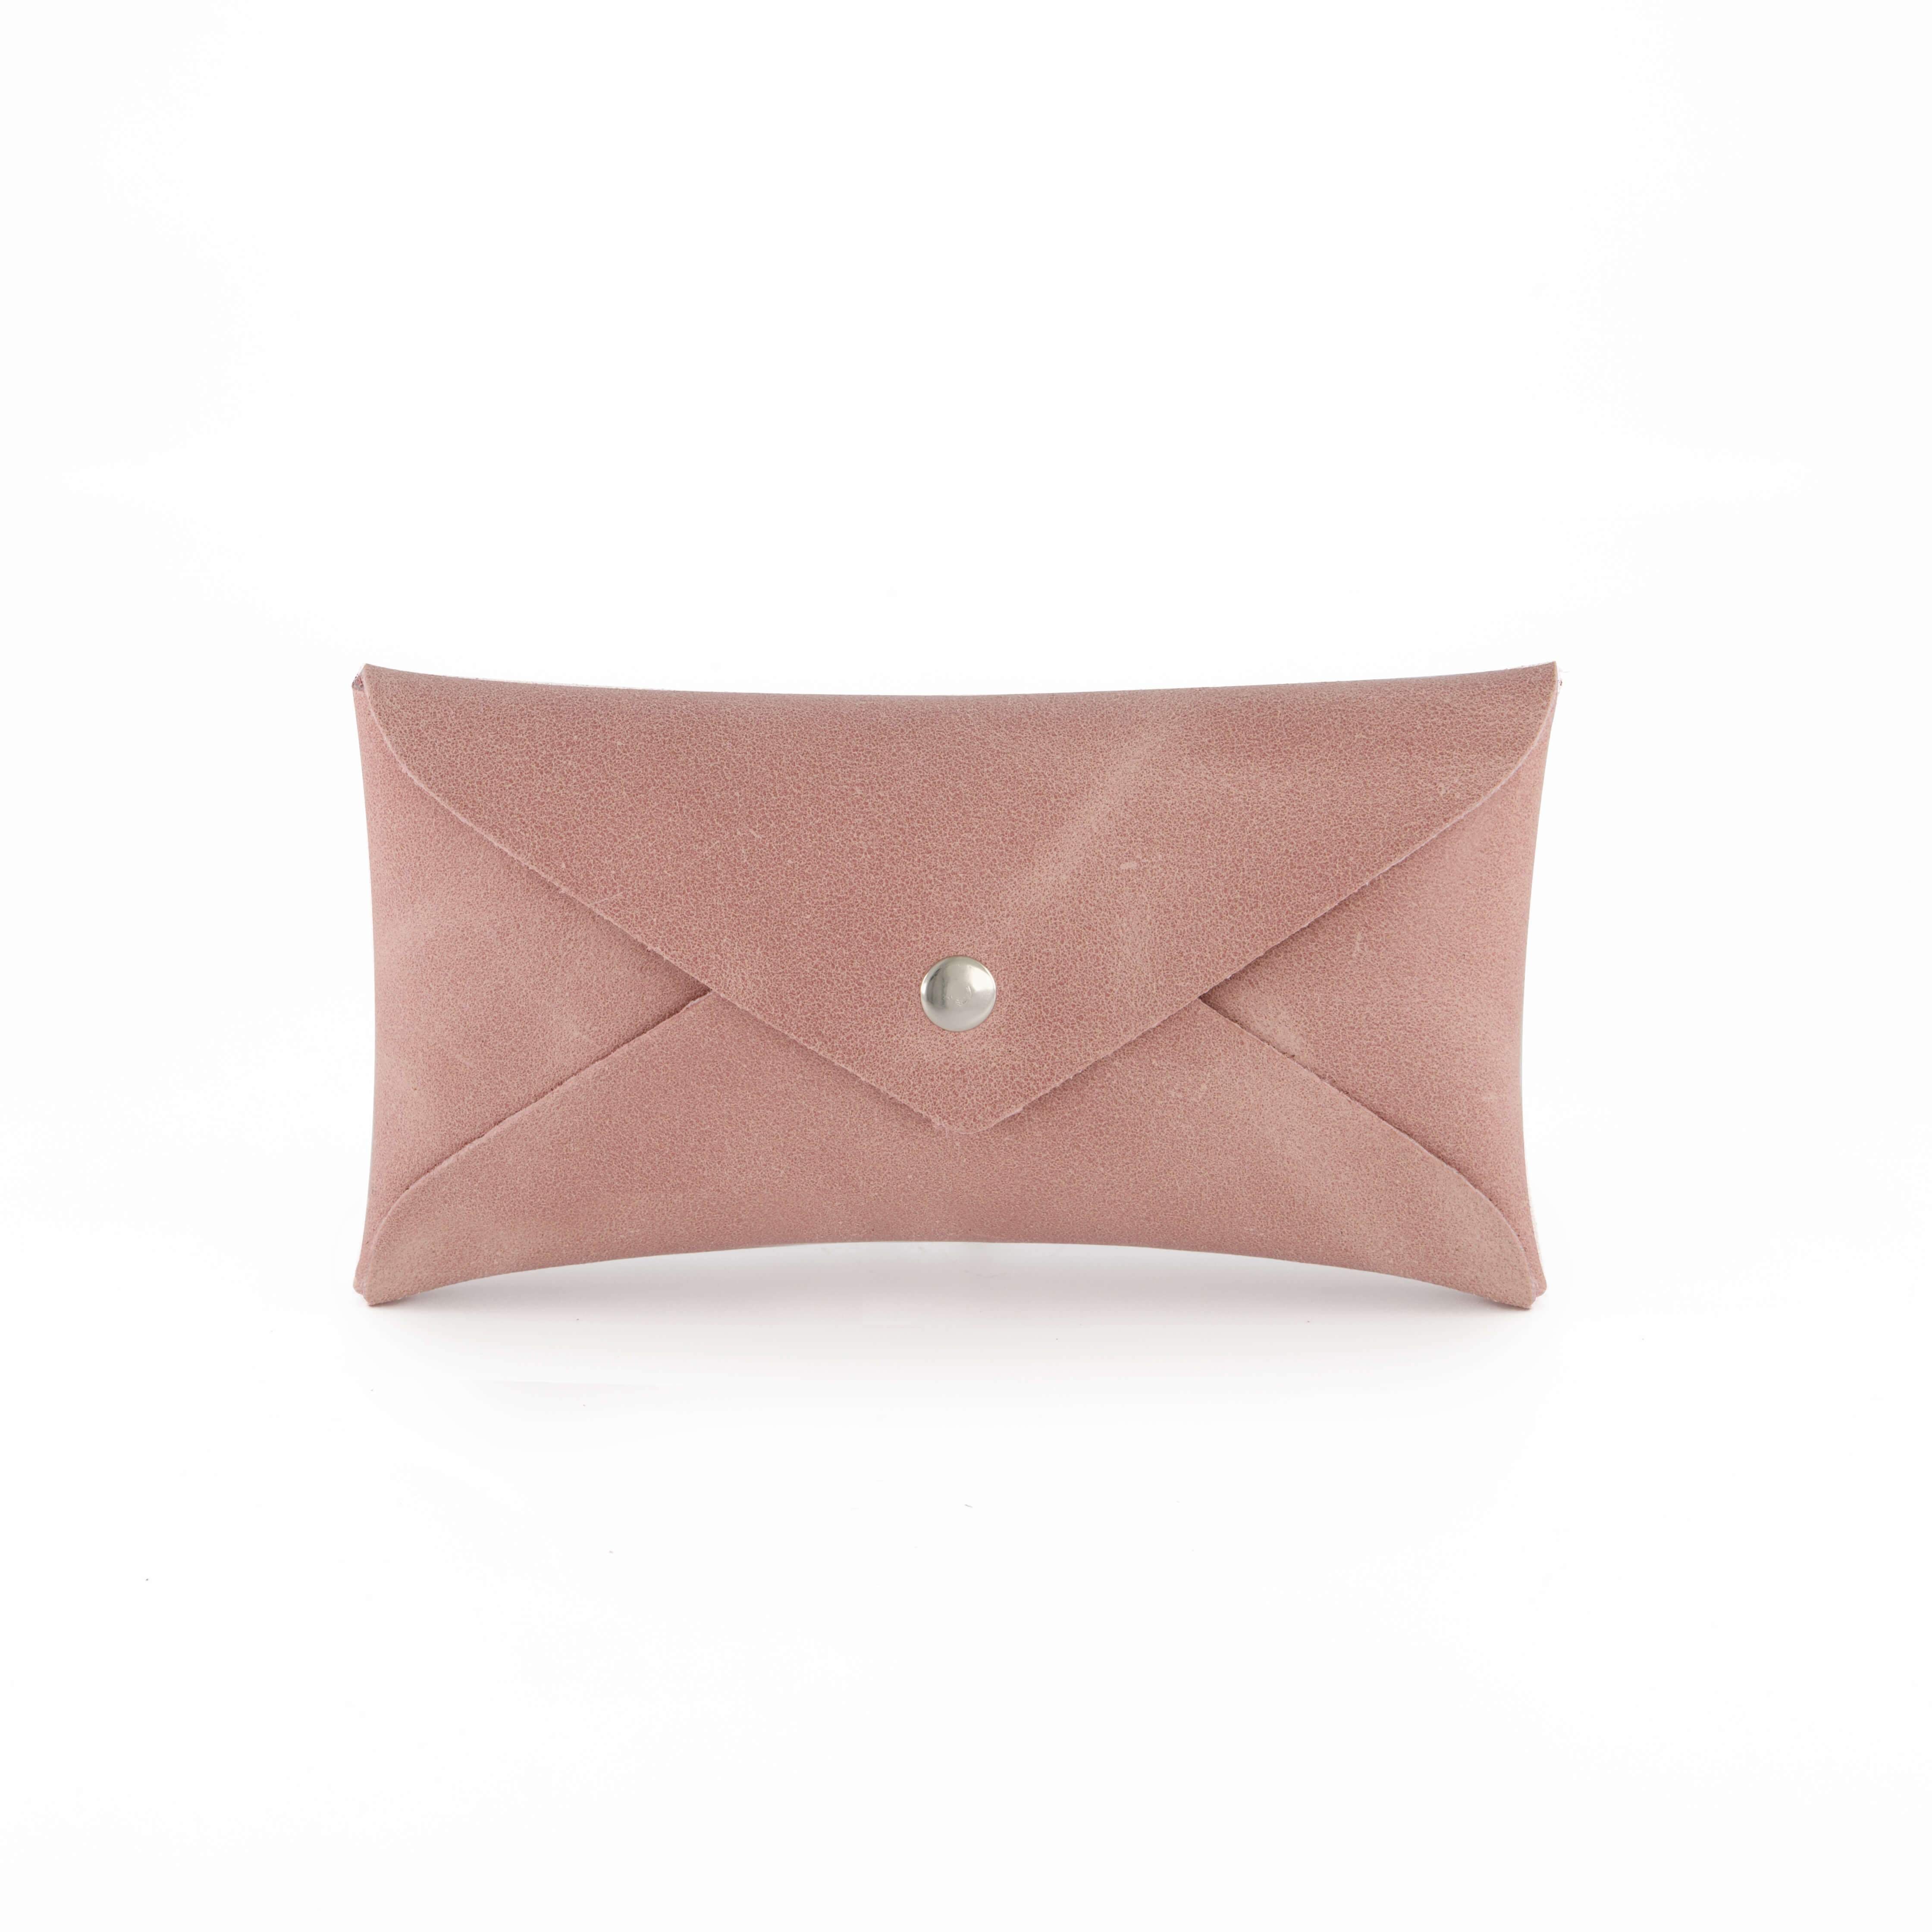 Leather Pouch, Envelope Pouch, Small Accessories